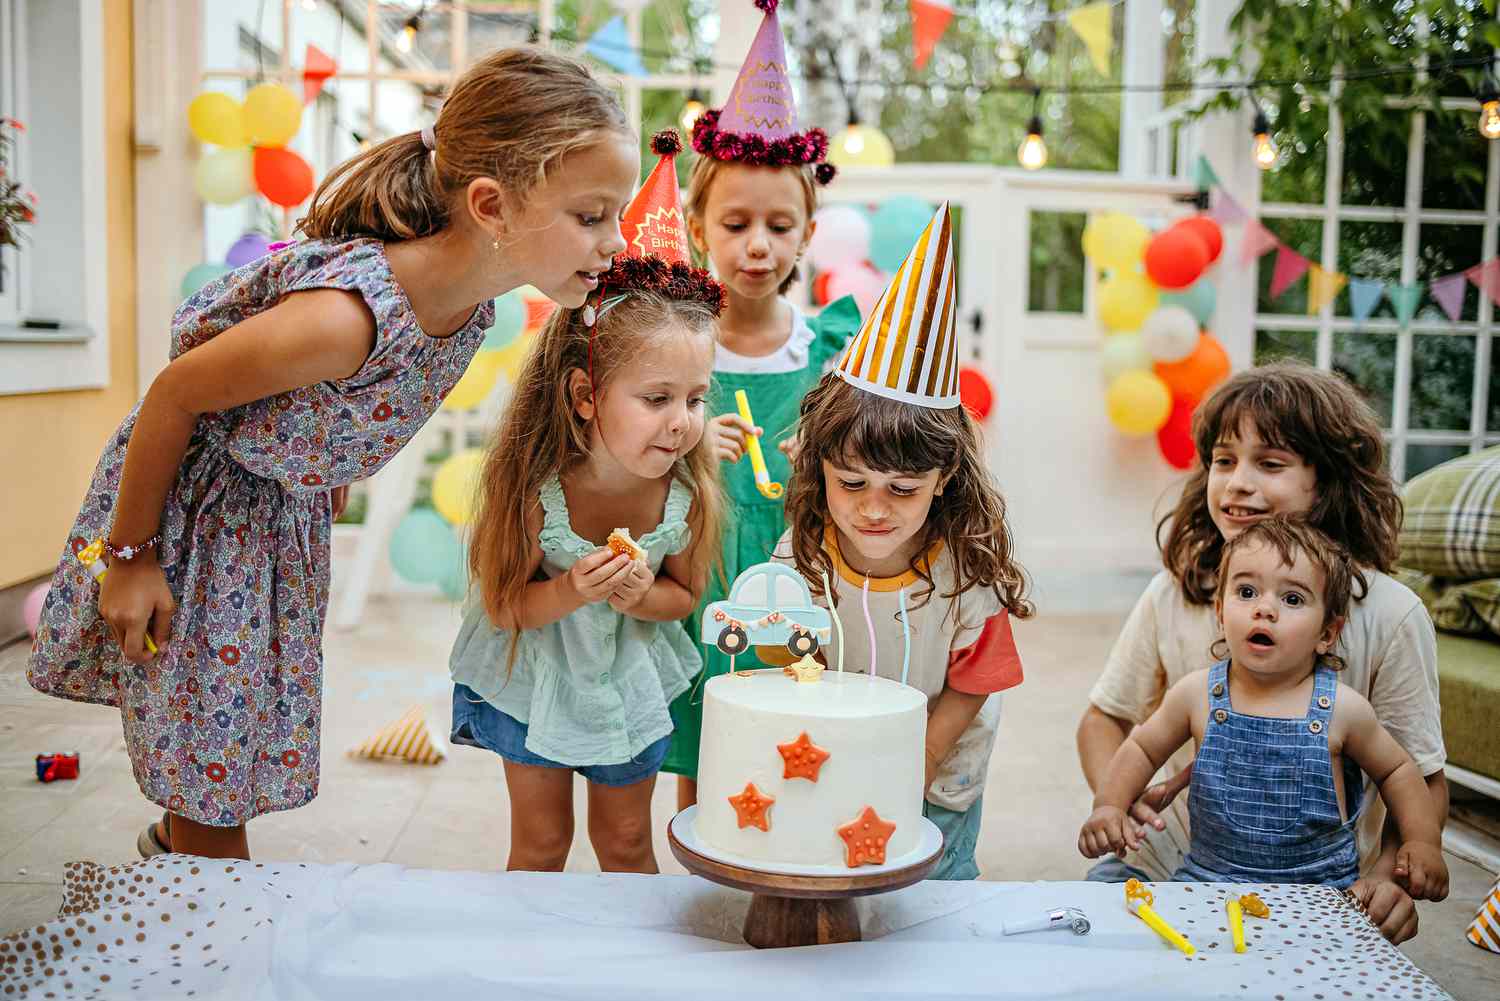 5 Creative Ideas to Make your Sibling’s Birthday Special – The Balloon Hub